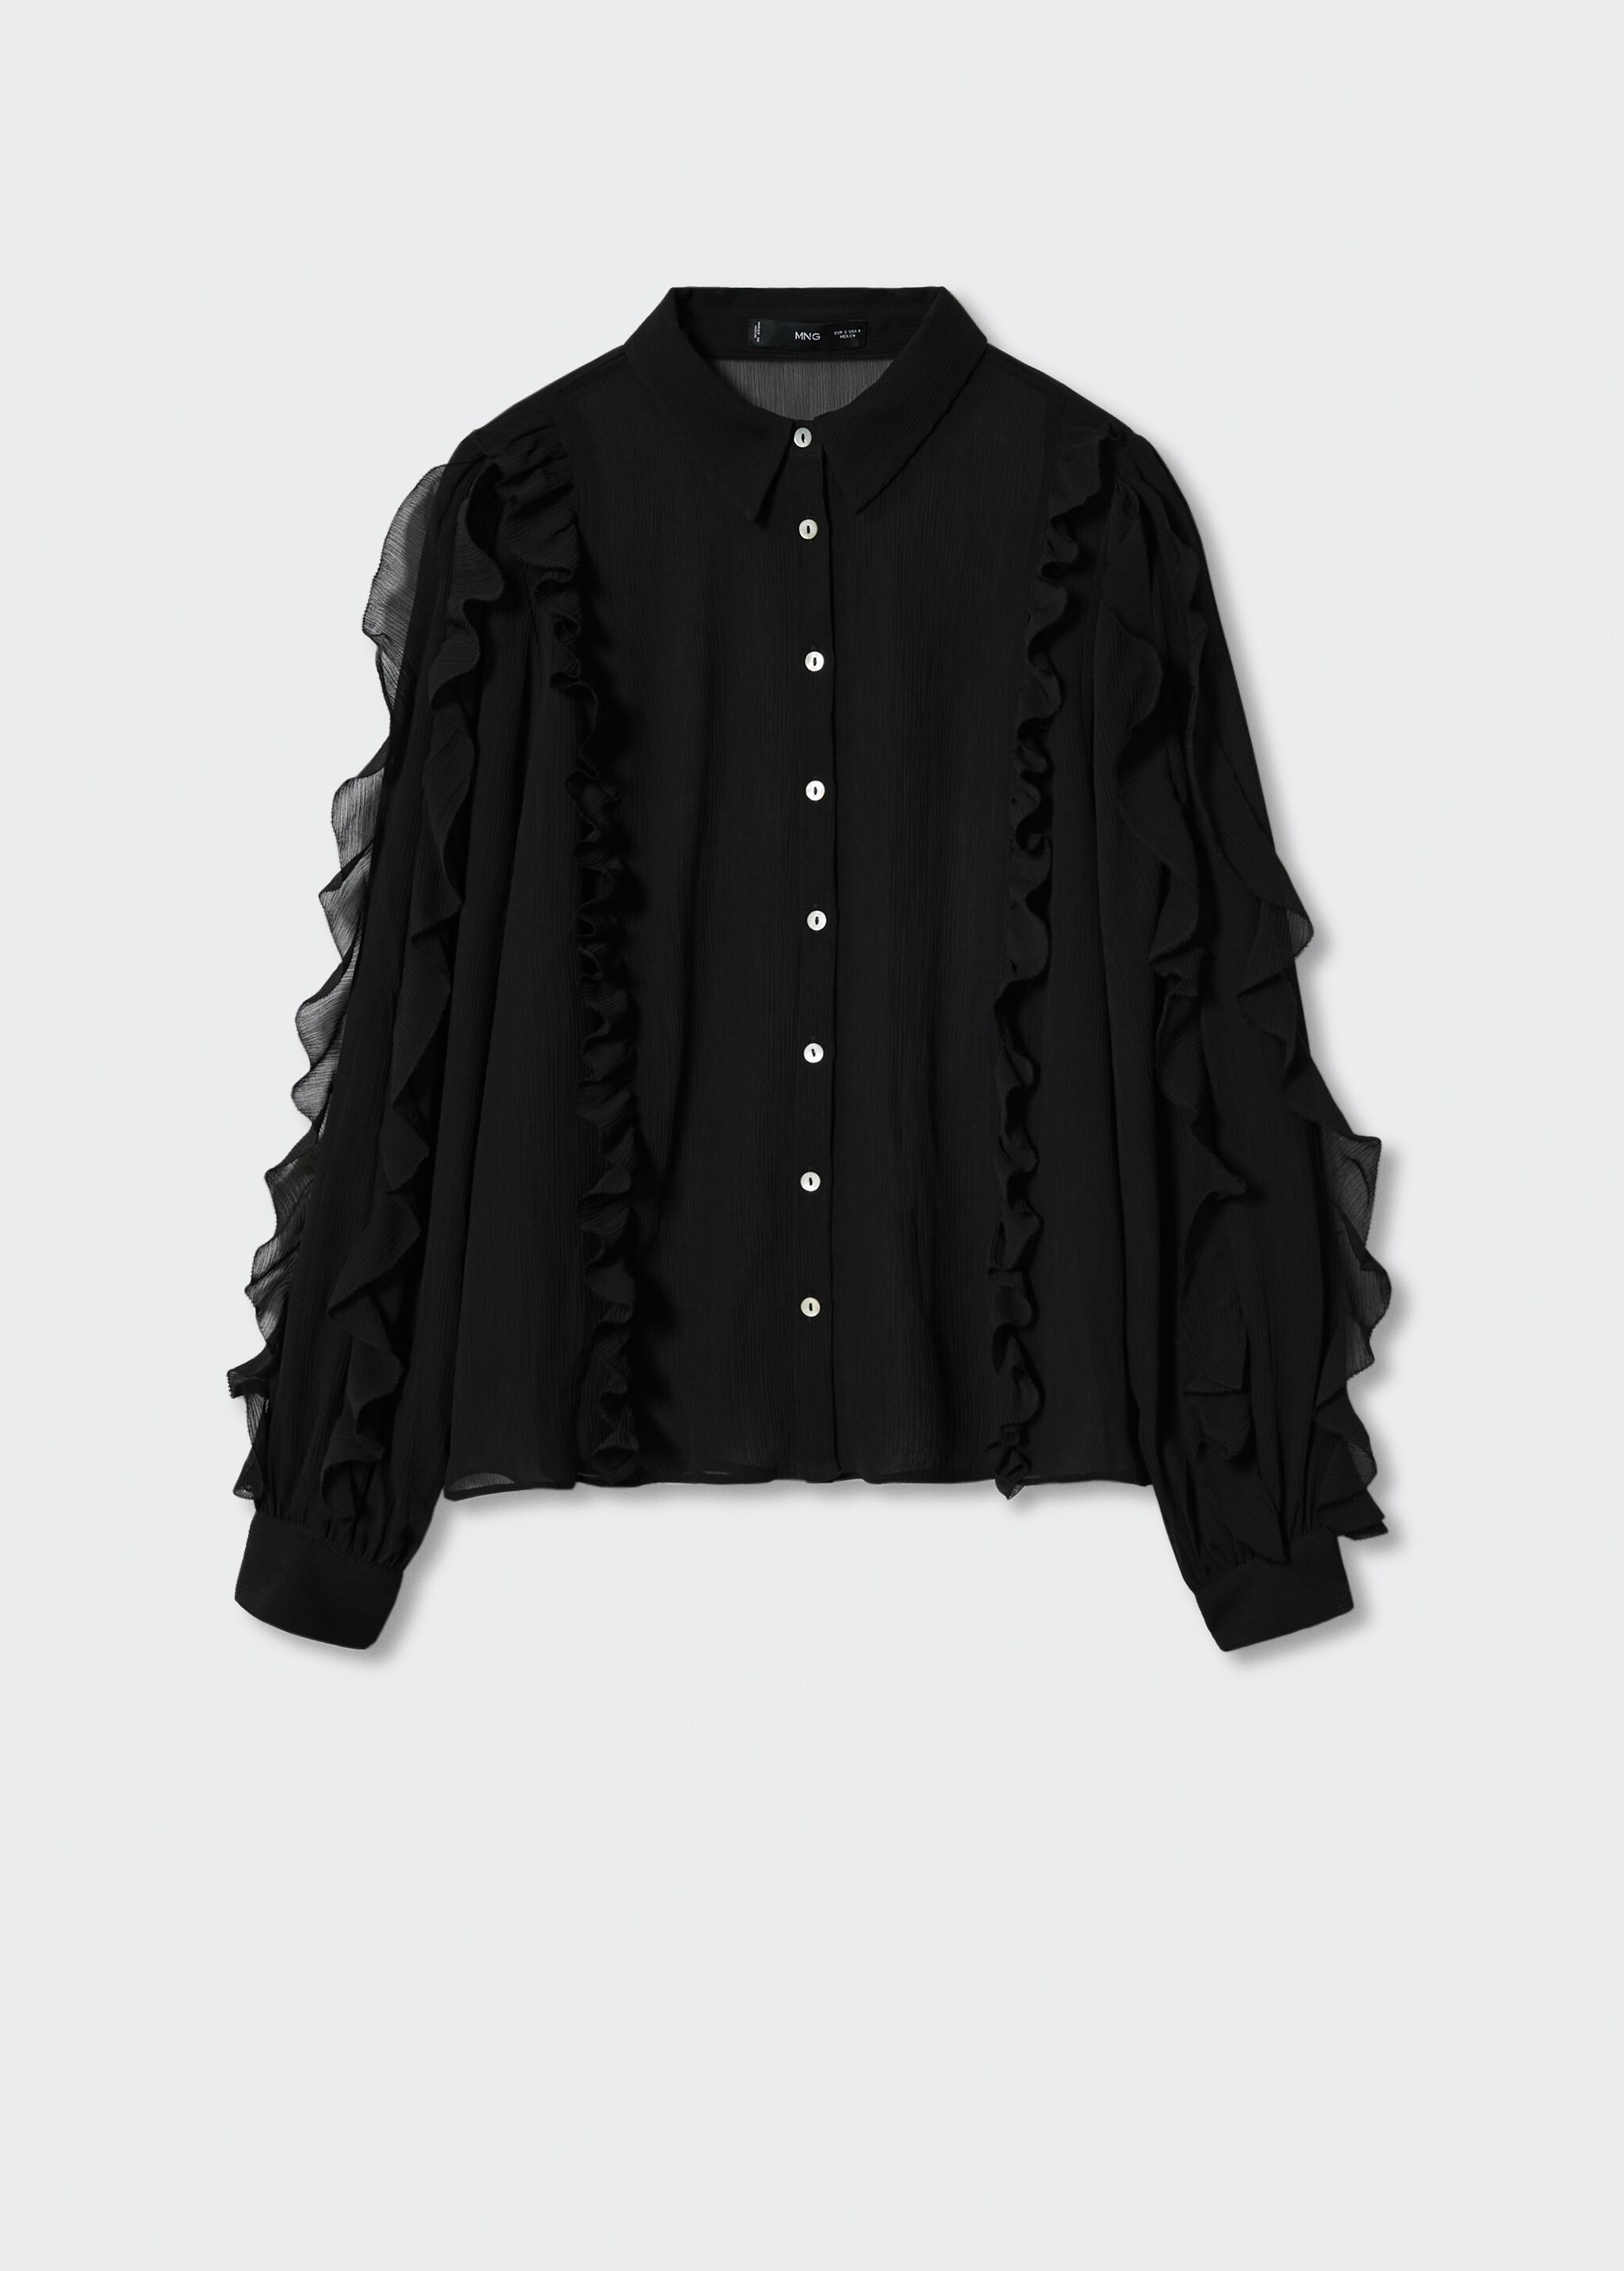 Textured ruffled blouse - Article without model